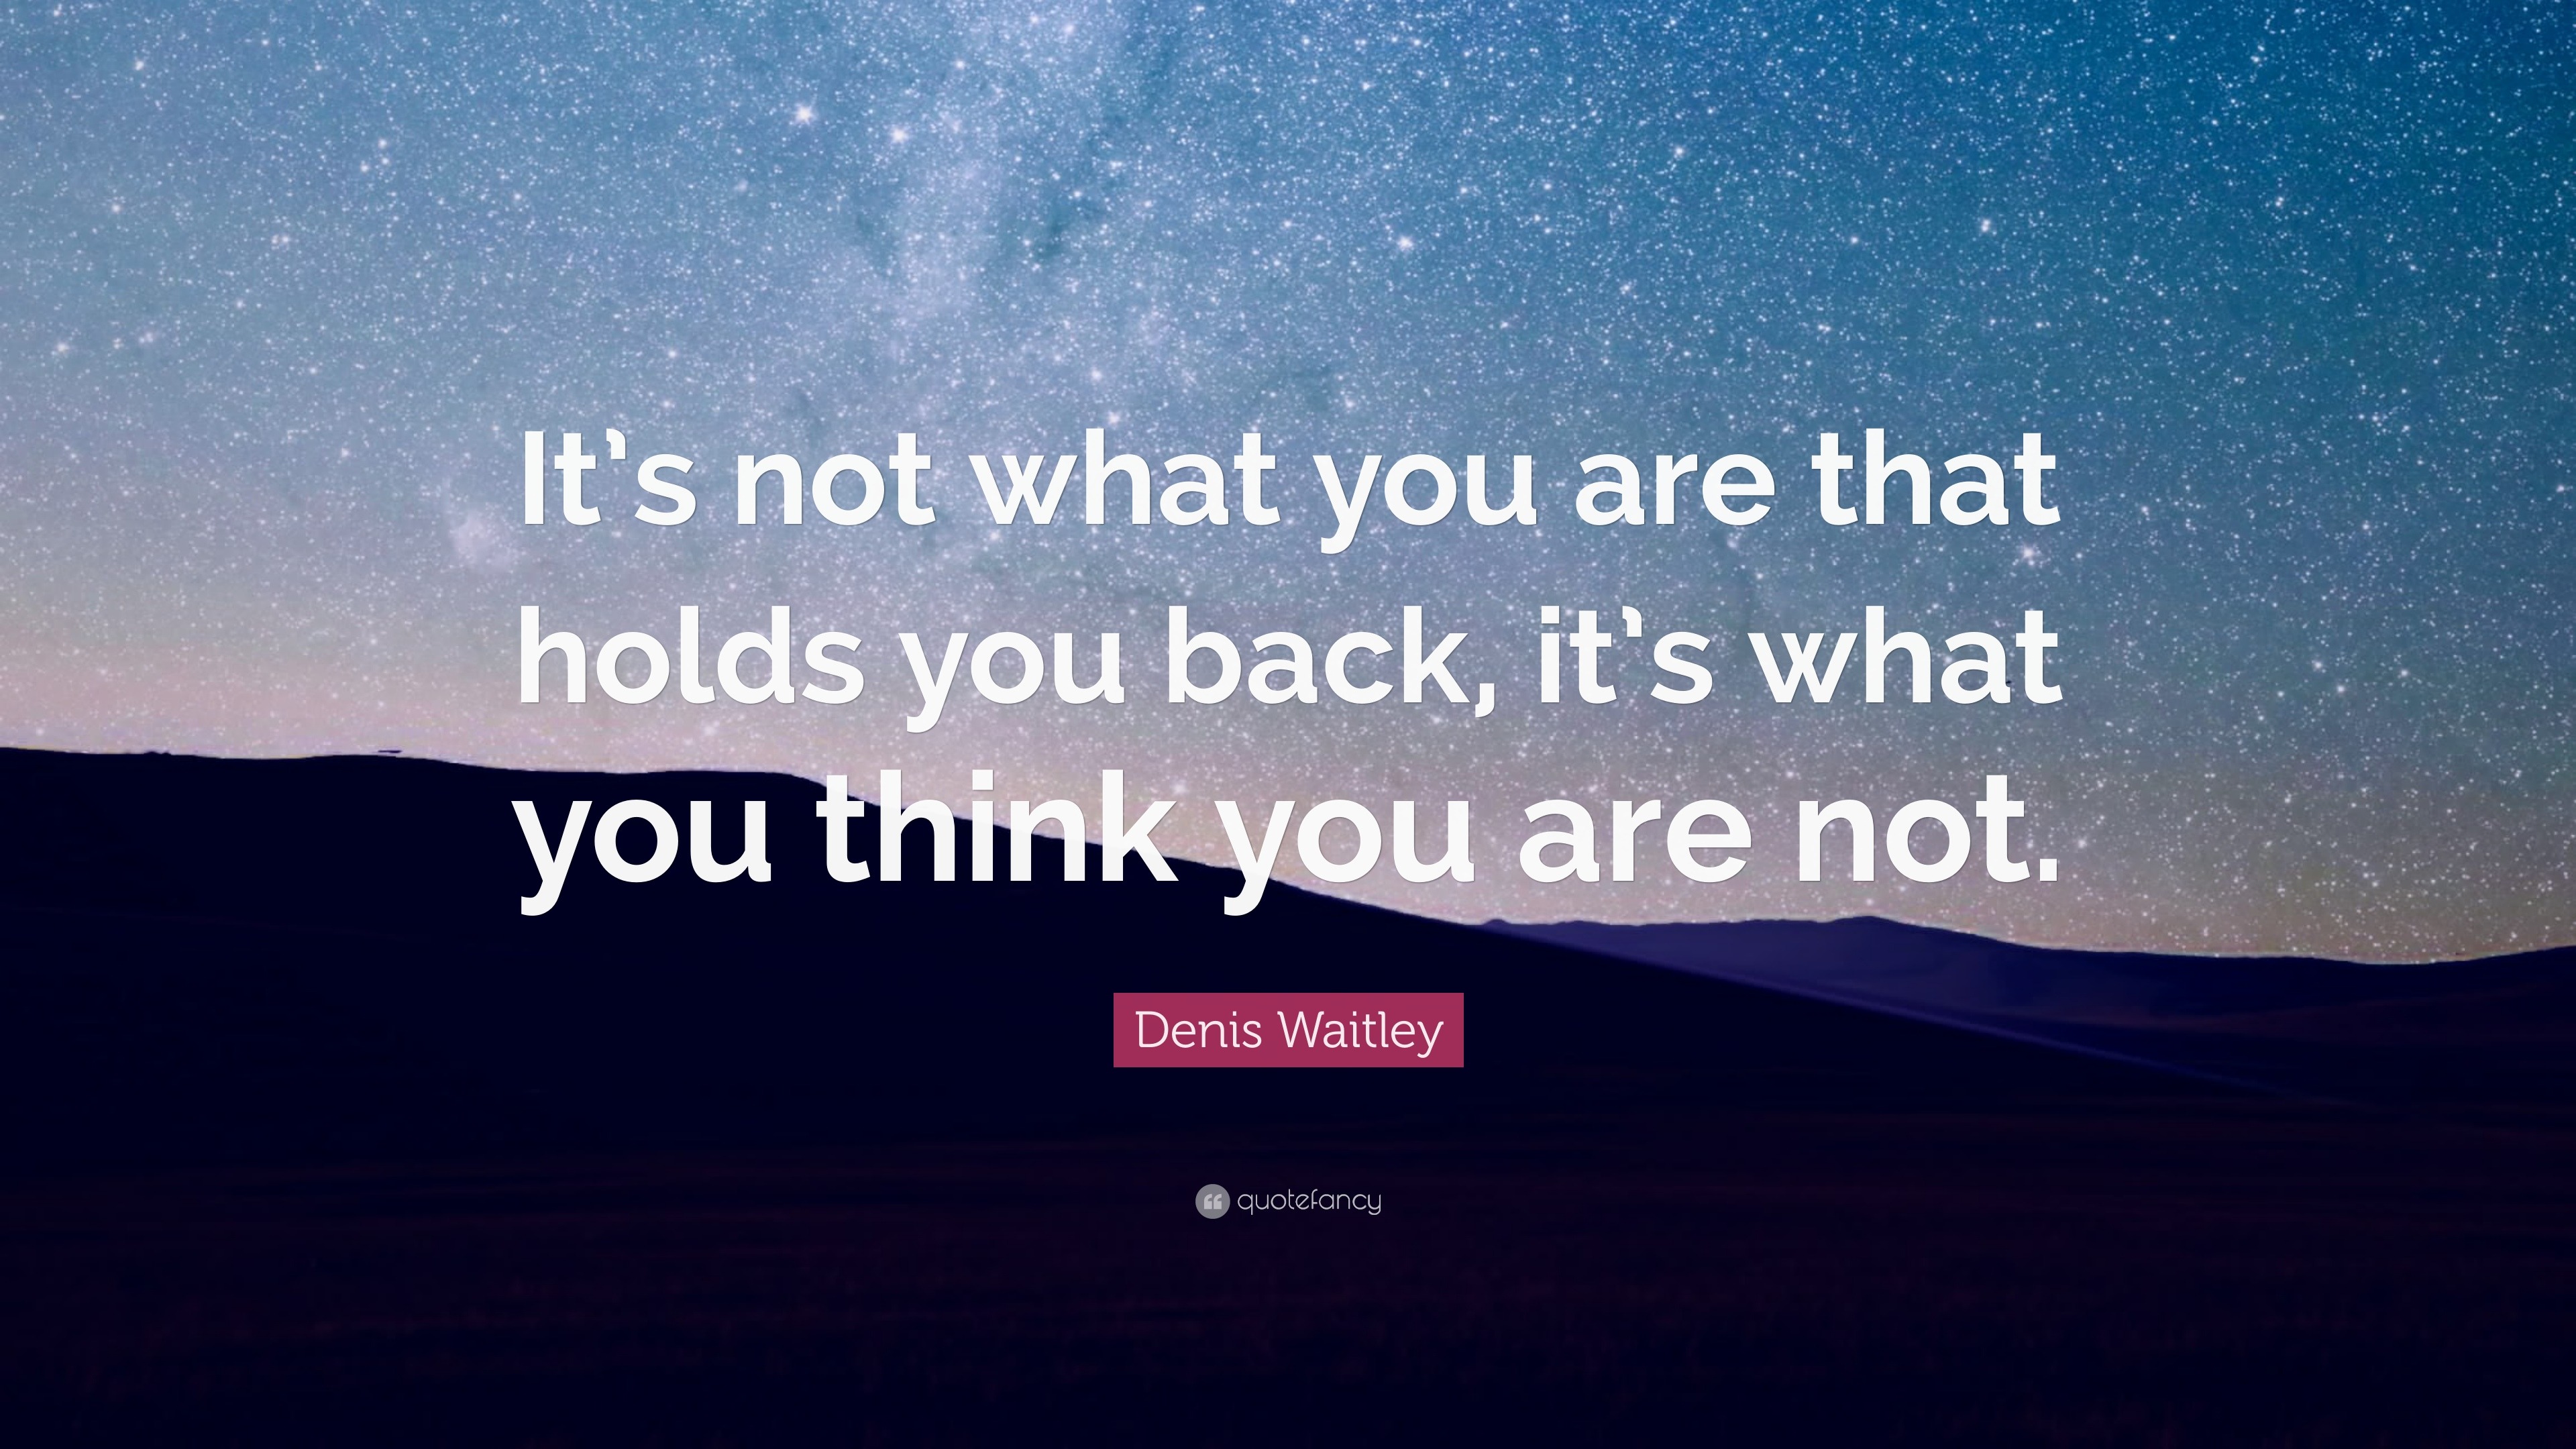 Denis Waitley Quote: “It's Not What You Are That Holds You Back, It's What You Think